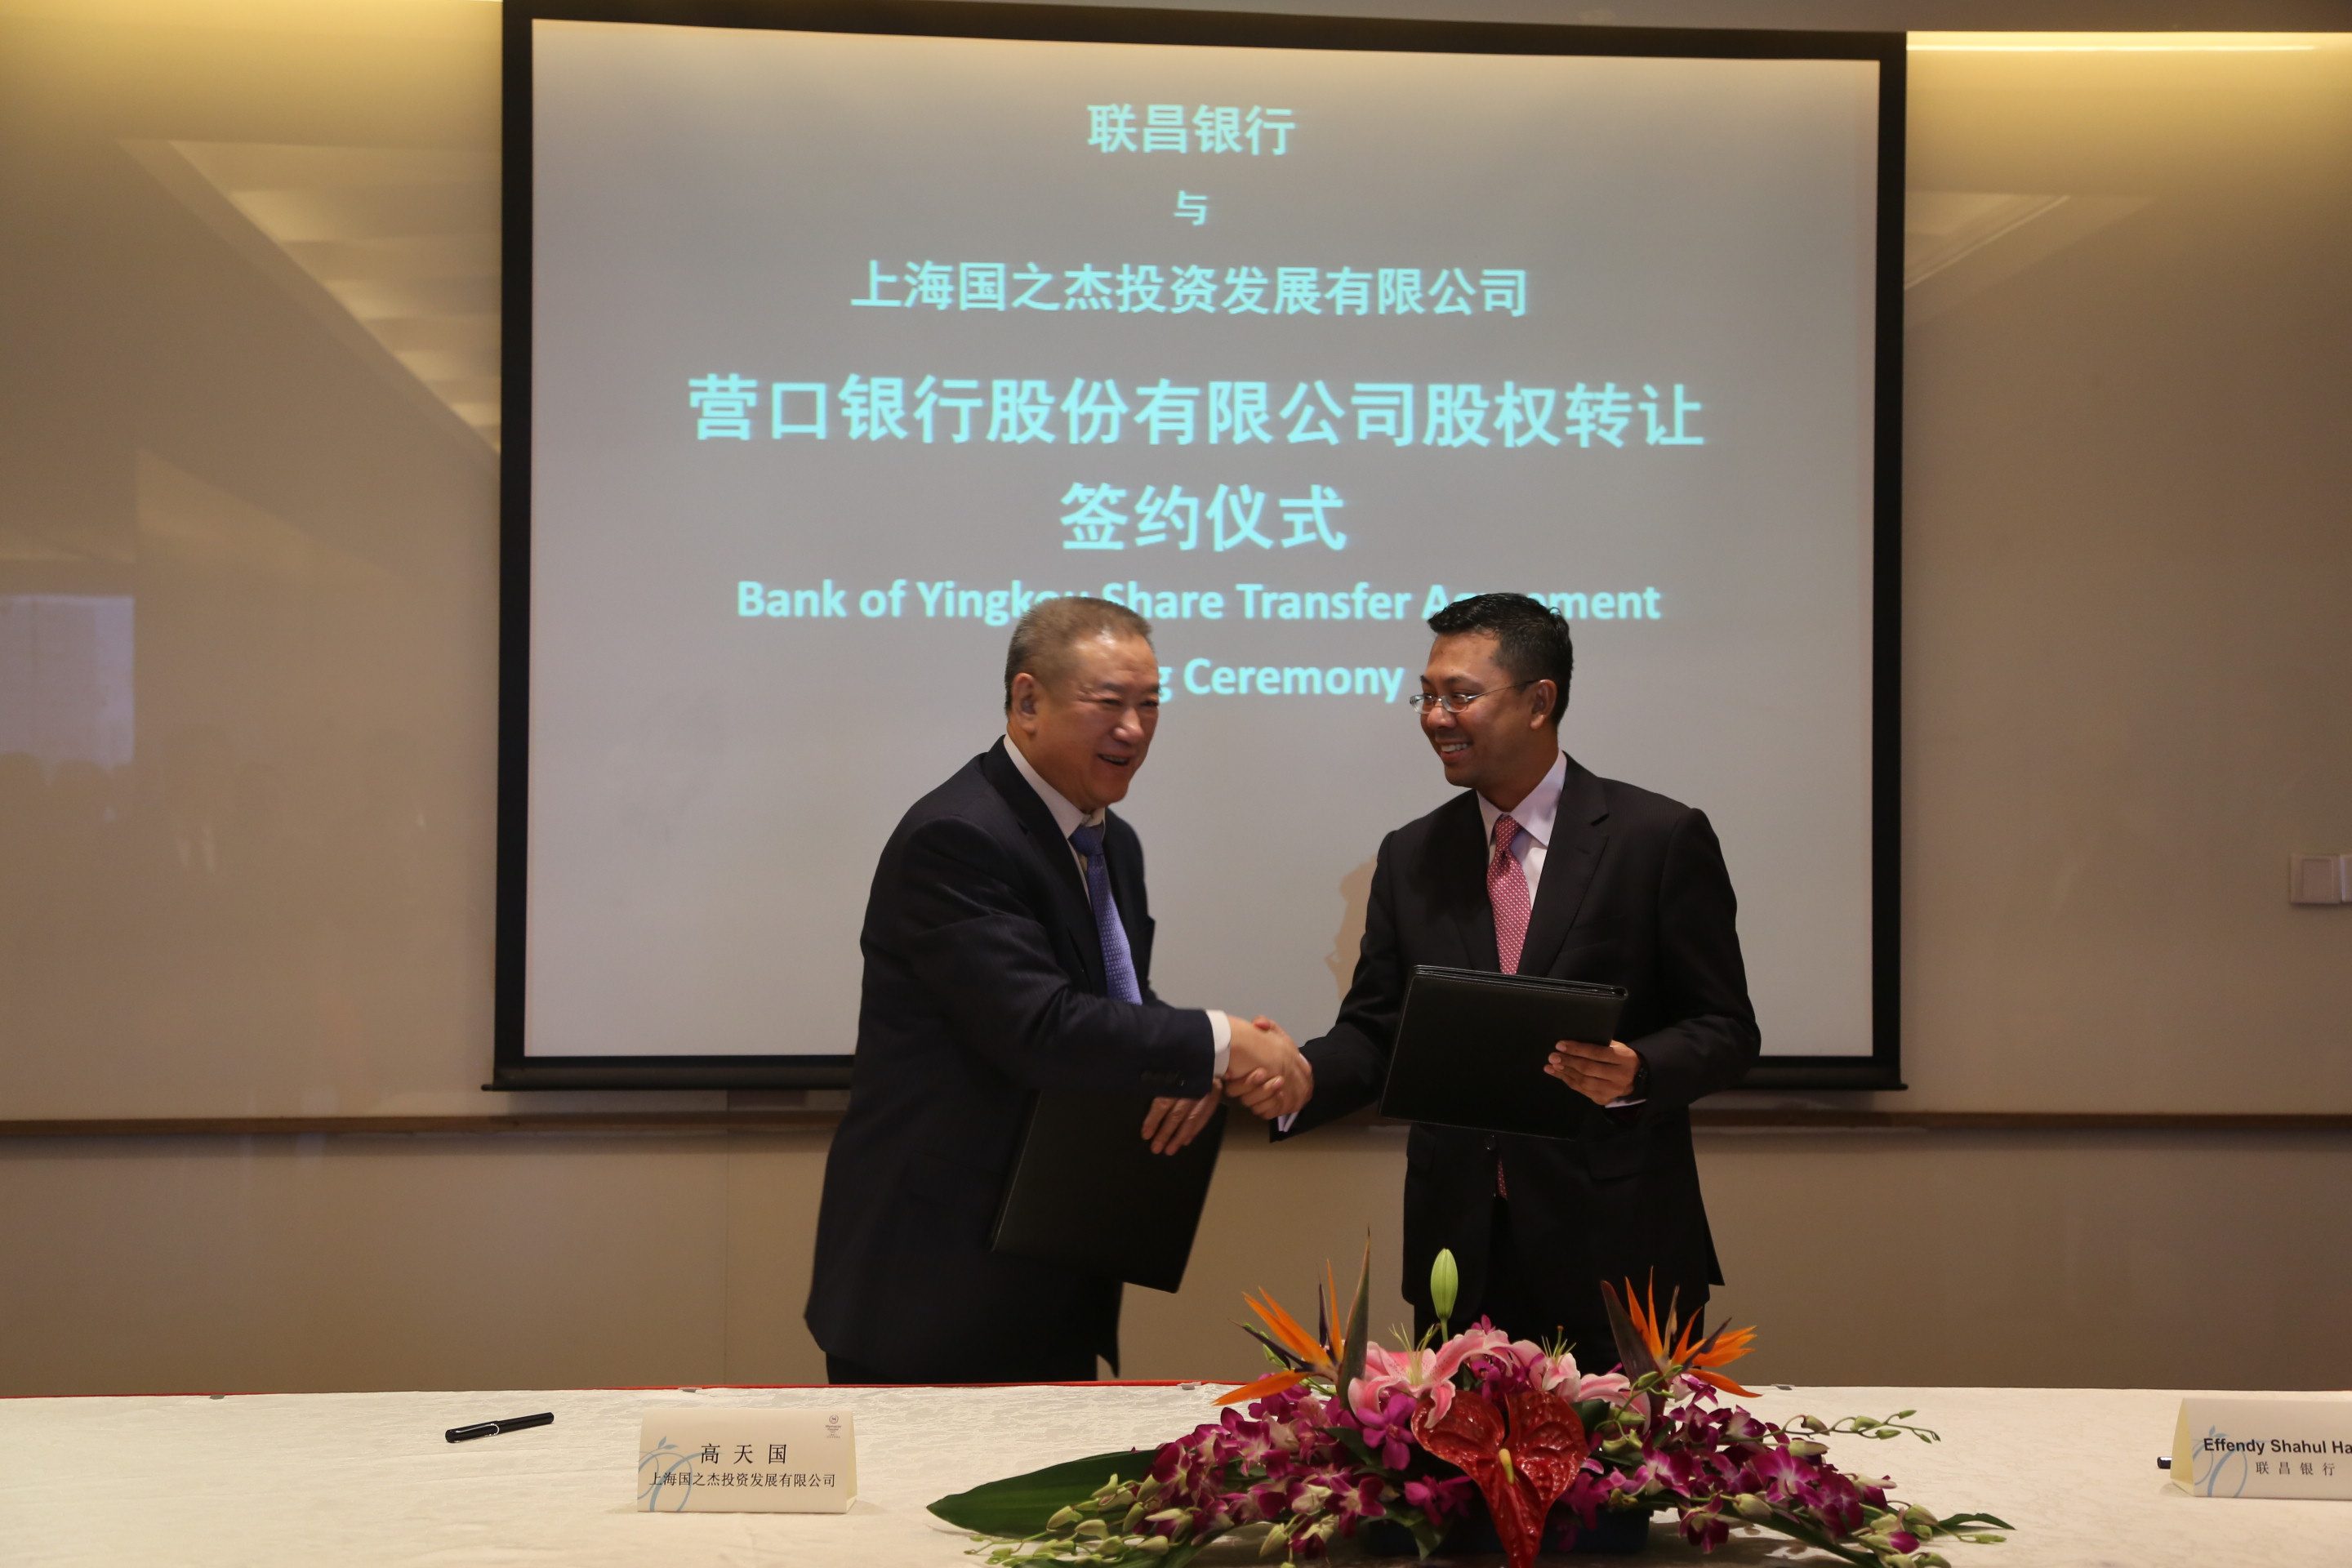 Malaysia: CIMB sell its stake in China's Bank of Yingkou for $216.7m